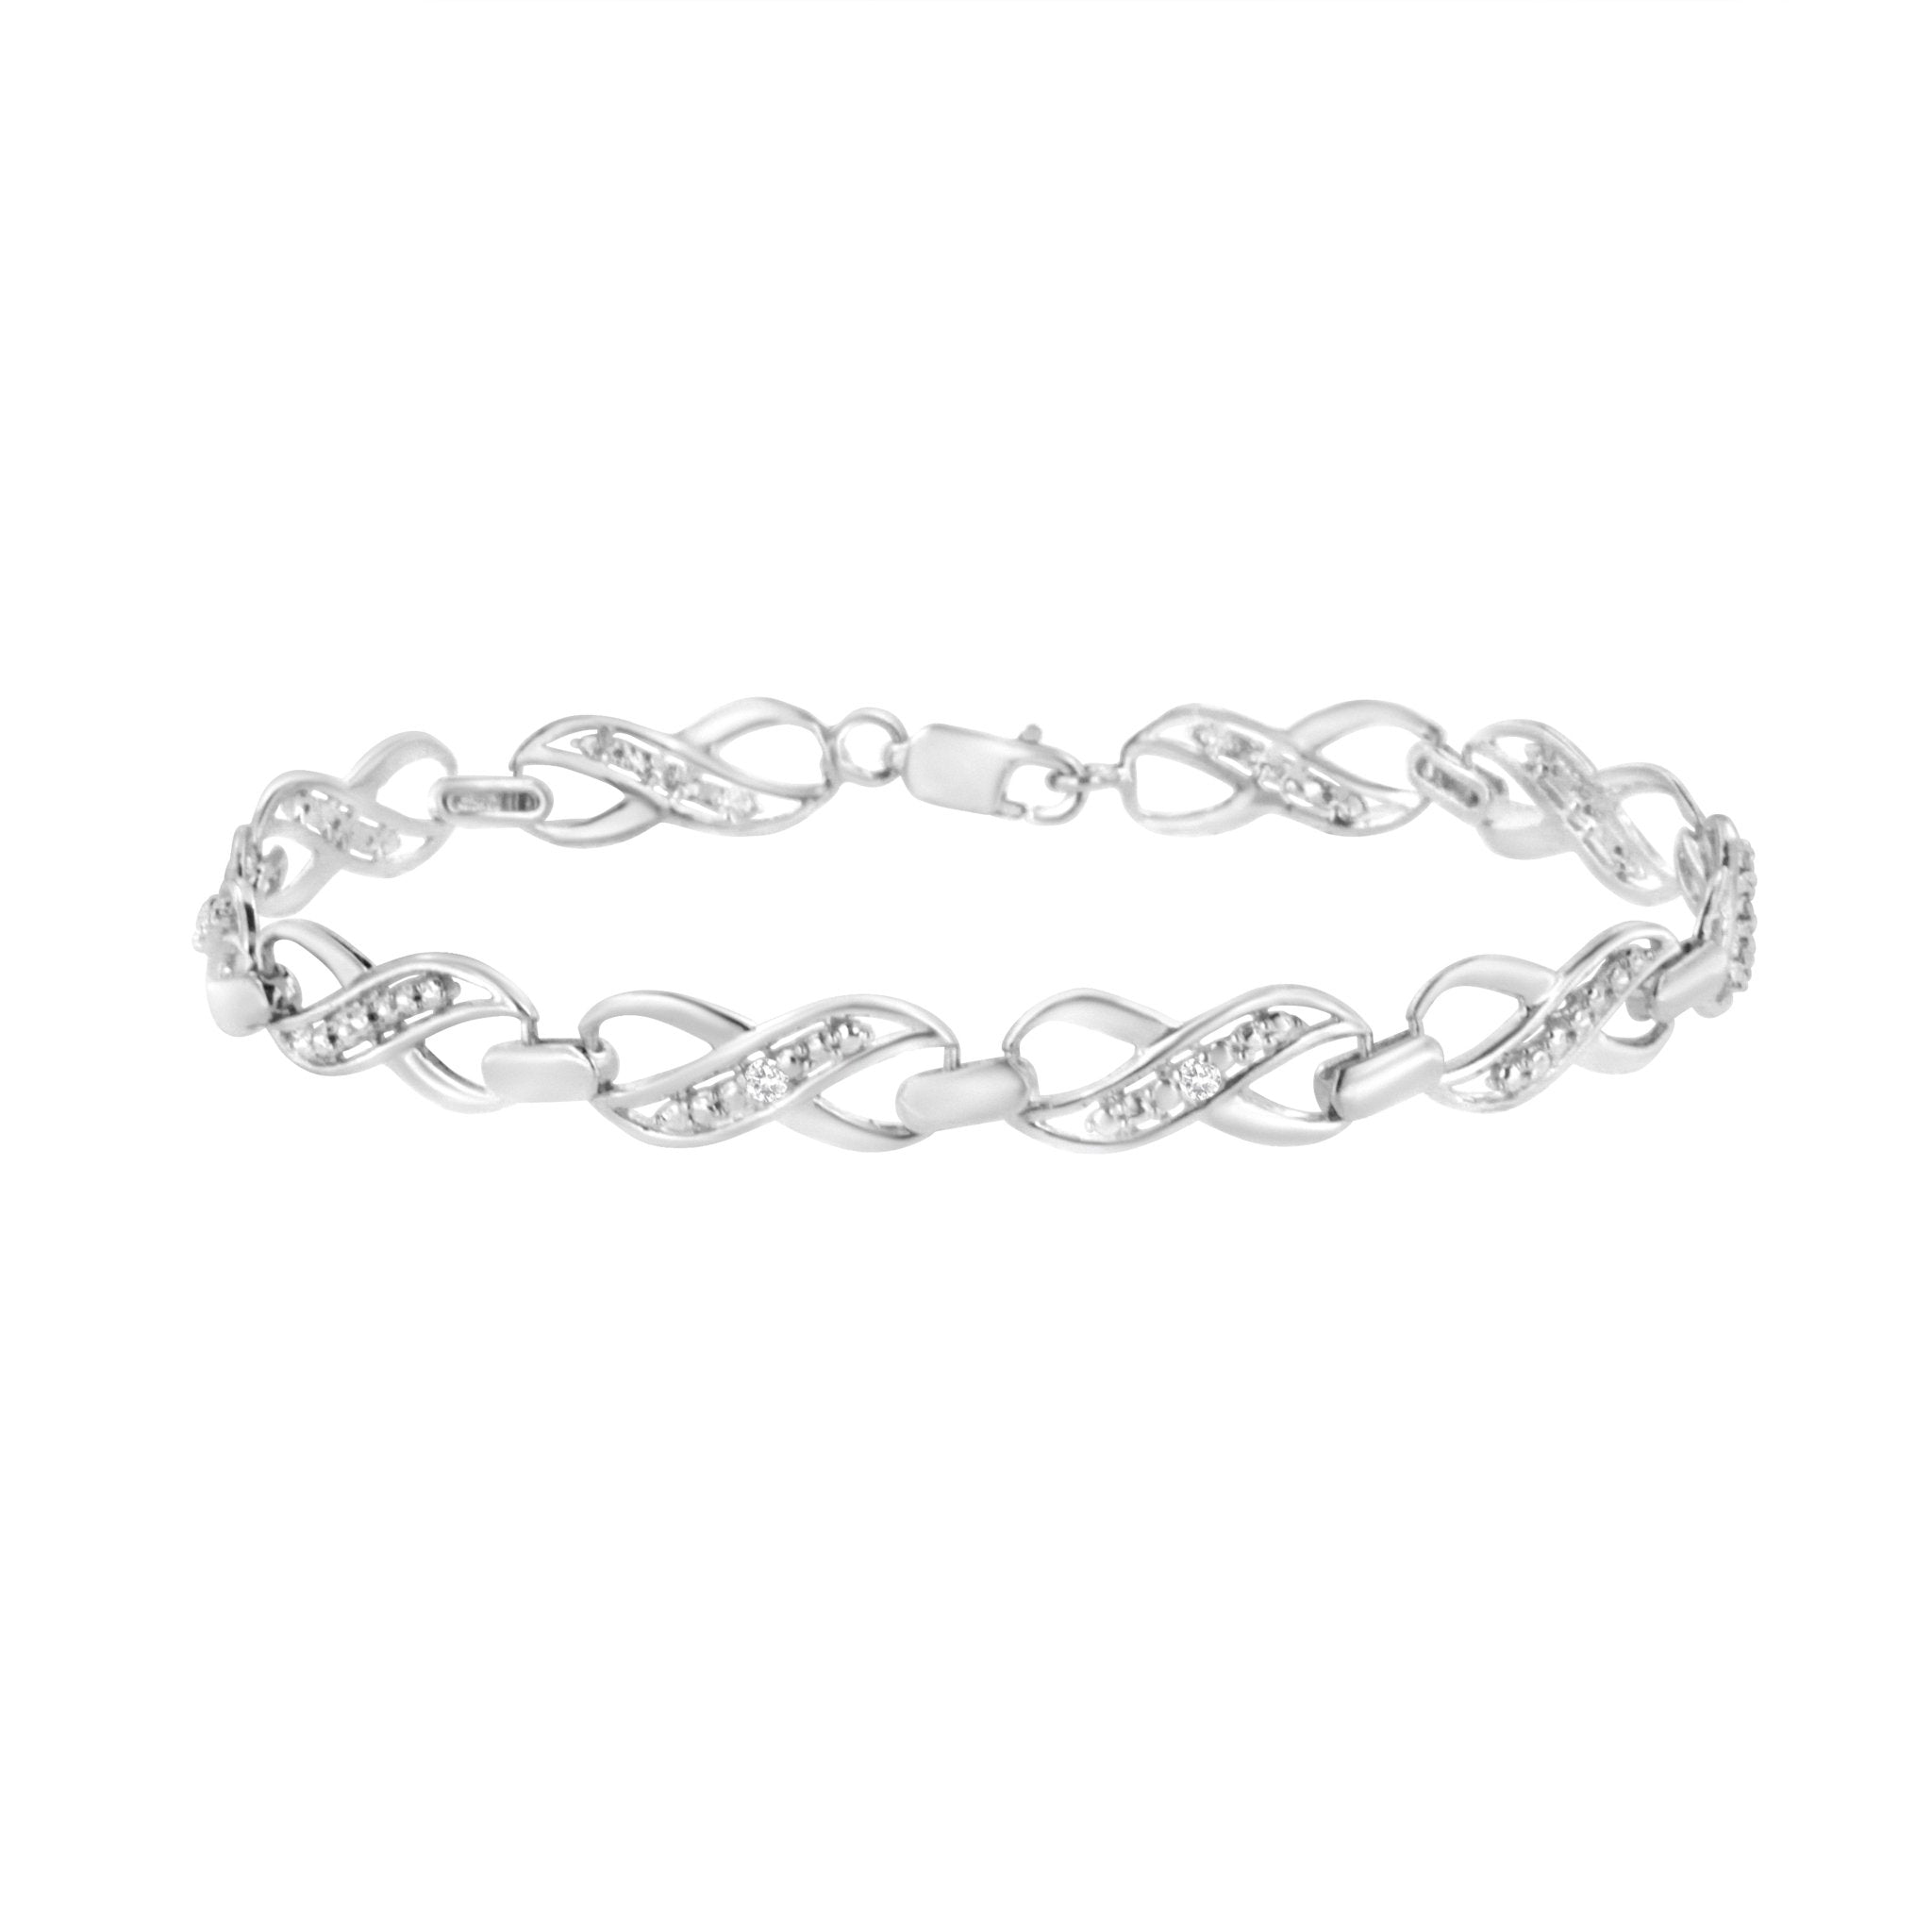 .925 Sterling Silver Prong Set Diamond Accent Ribbon And Infinity Link Bracelet (I-J Color, I3 Clarity) - 7.25